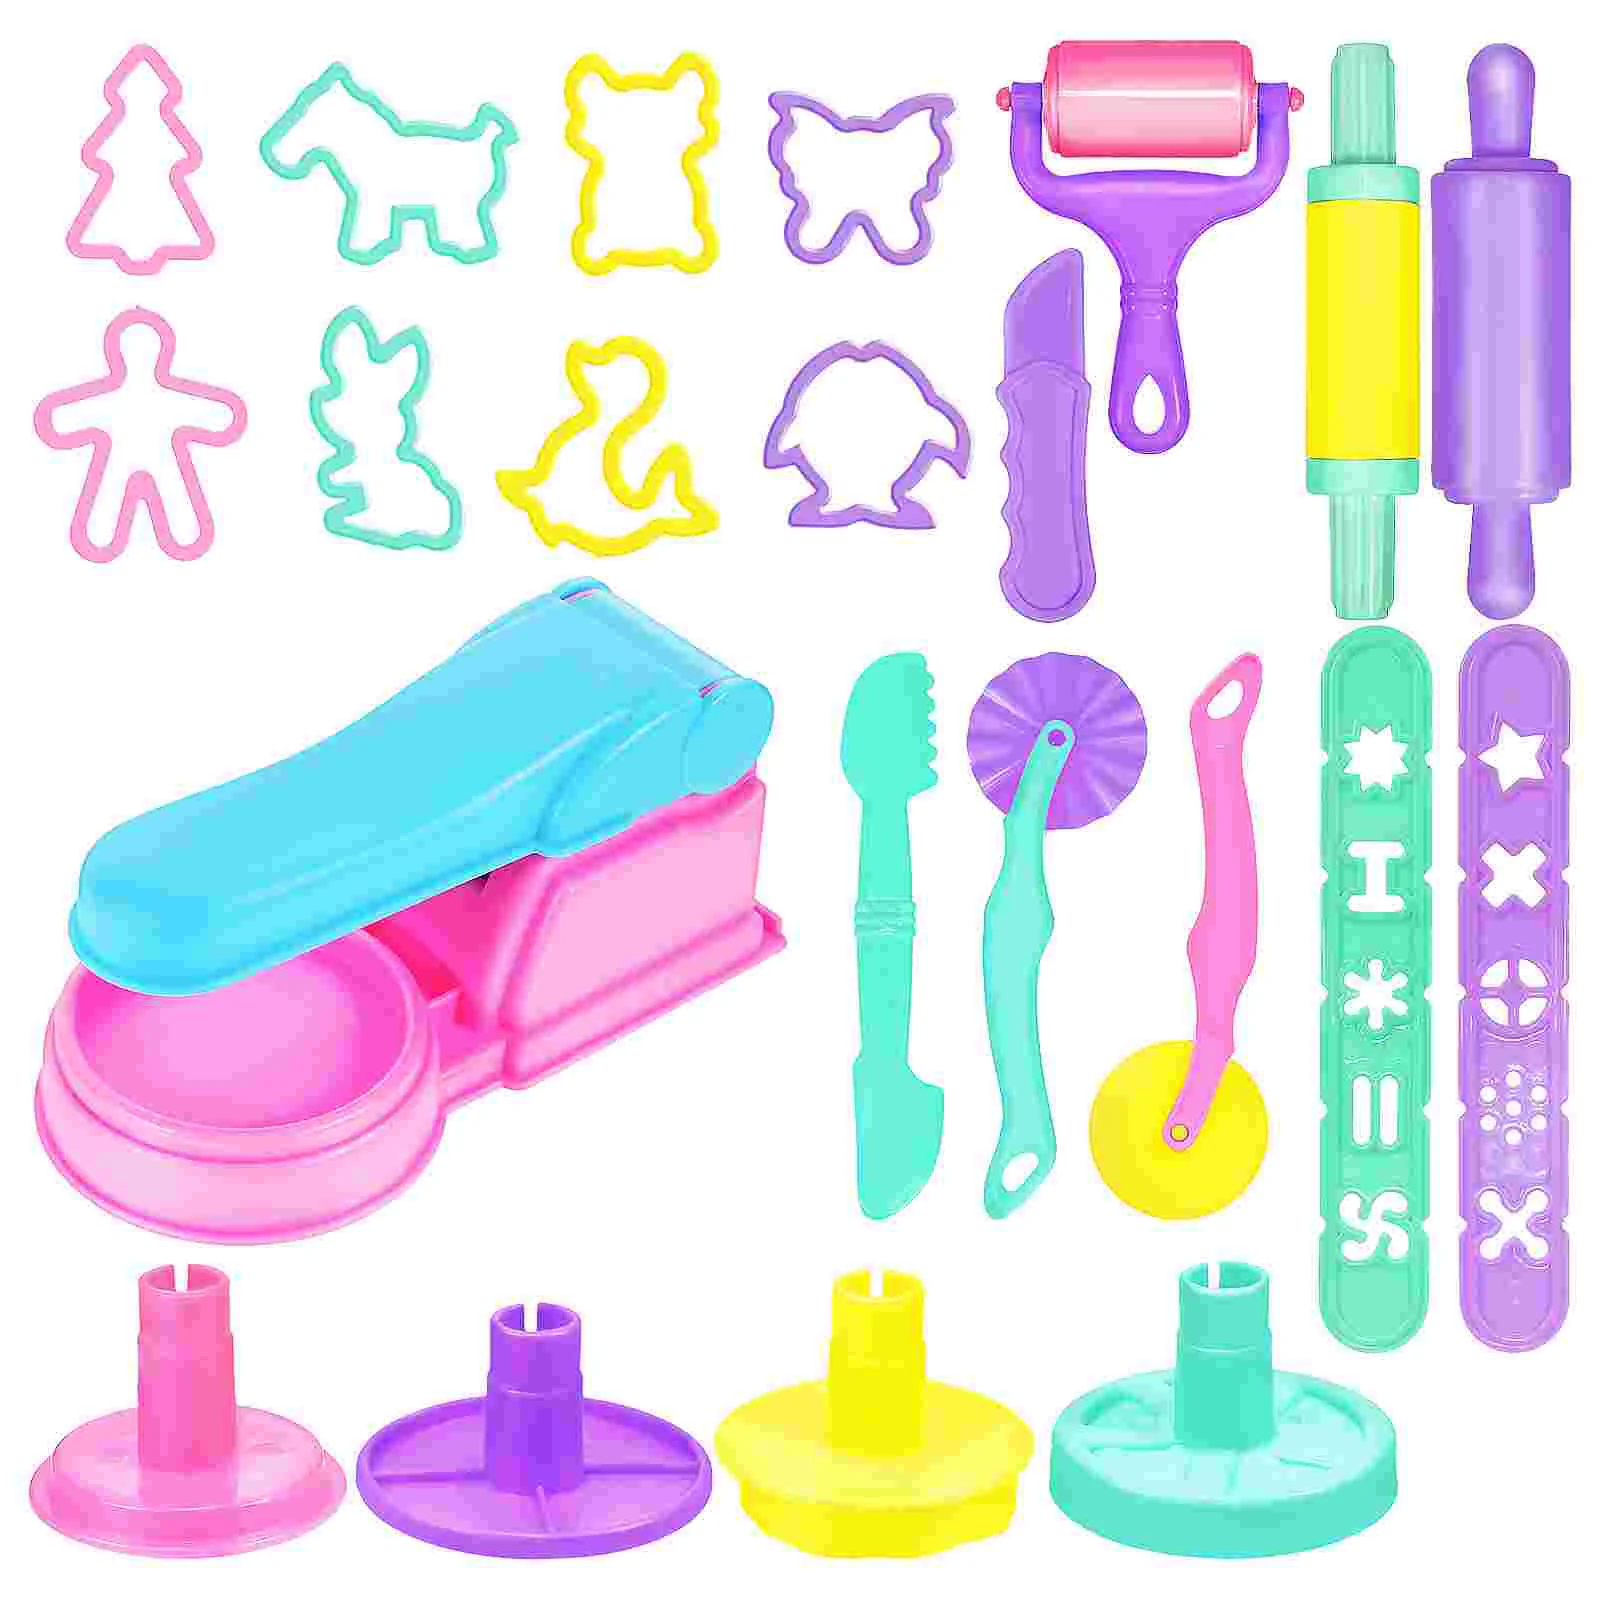 

Dough Tools Molds Clay Playdough Mold Kids Tool Animal Kit Modeling Baking Set Toys Plastic Play Press Sand Rolling Accessories